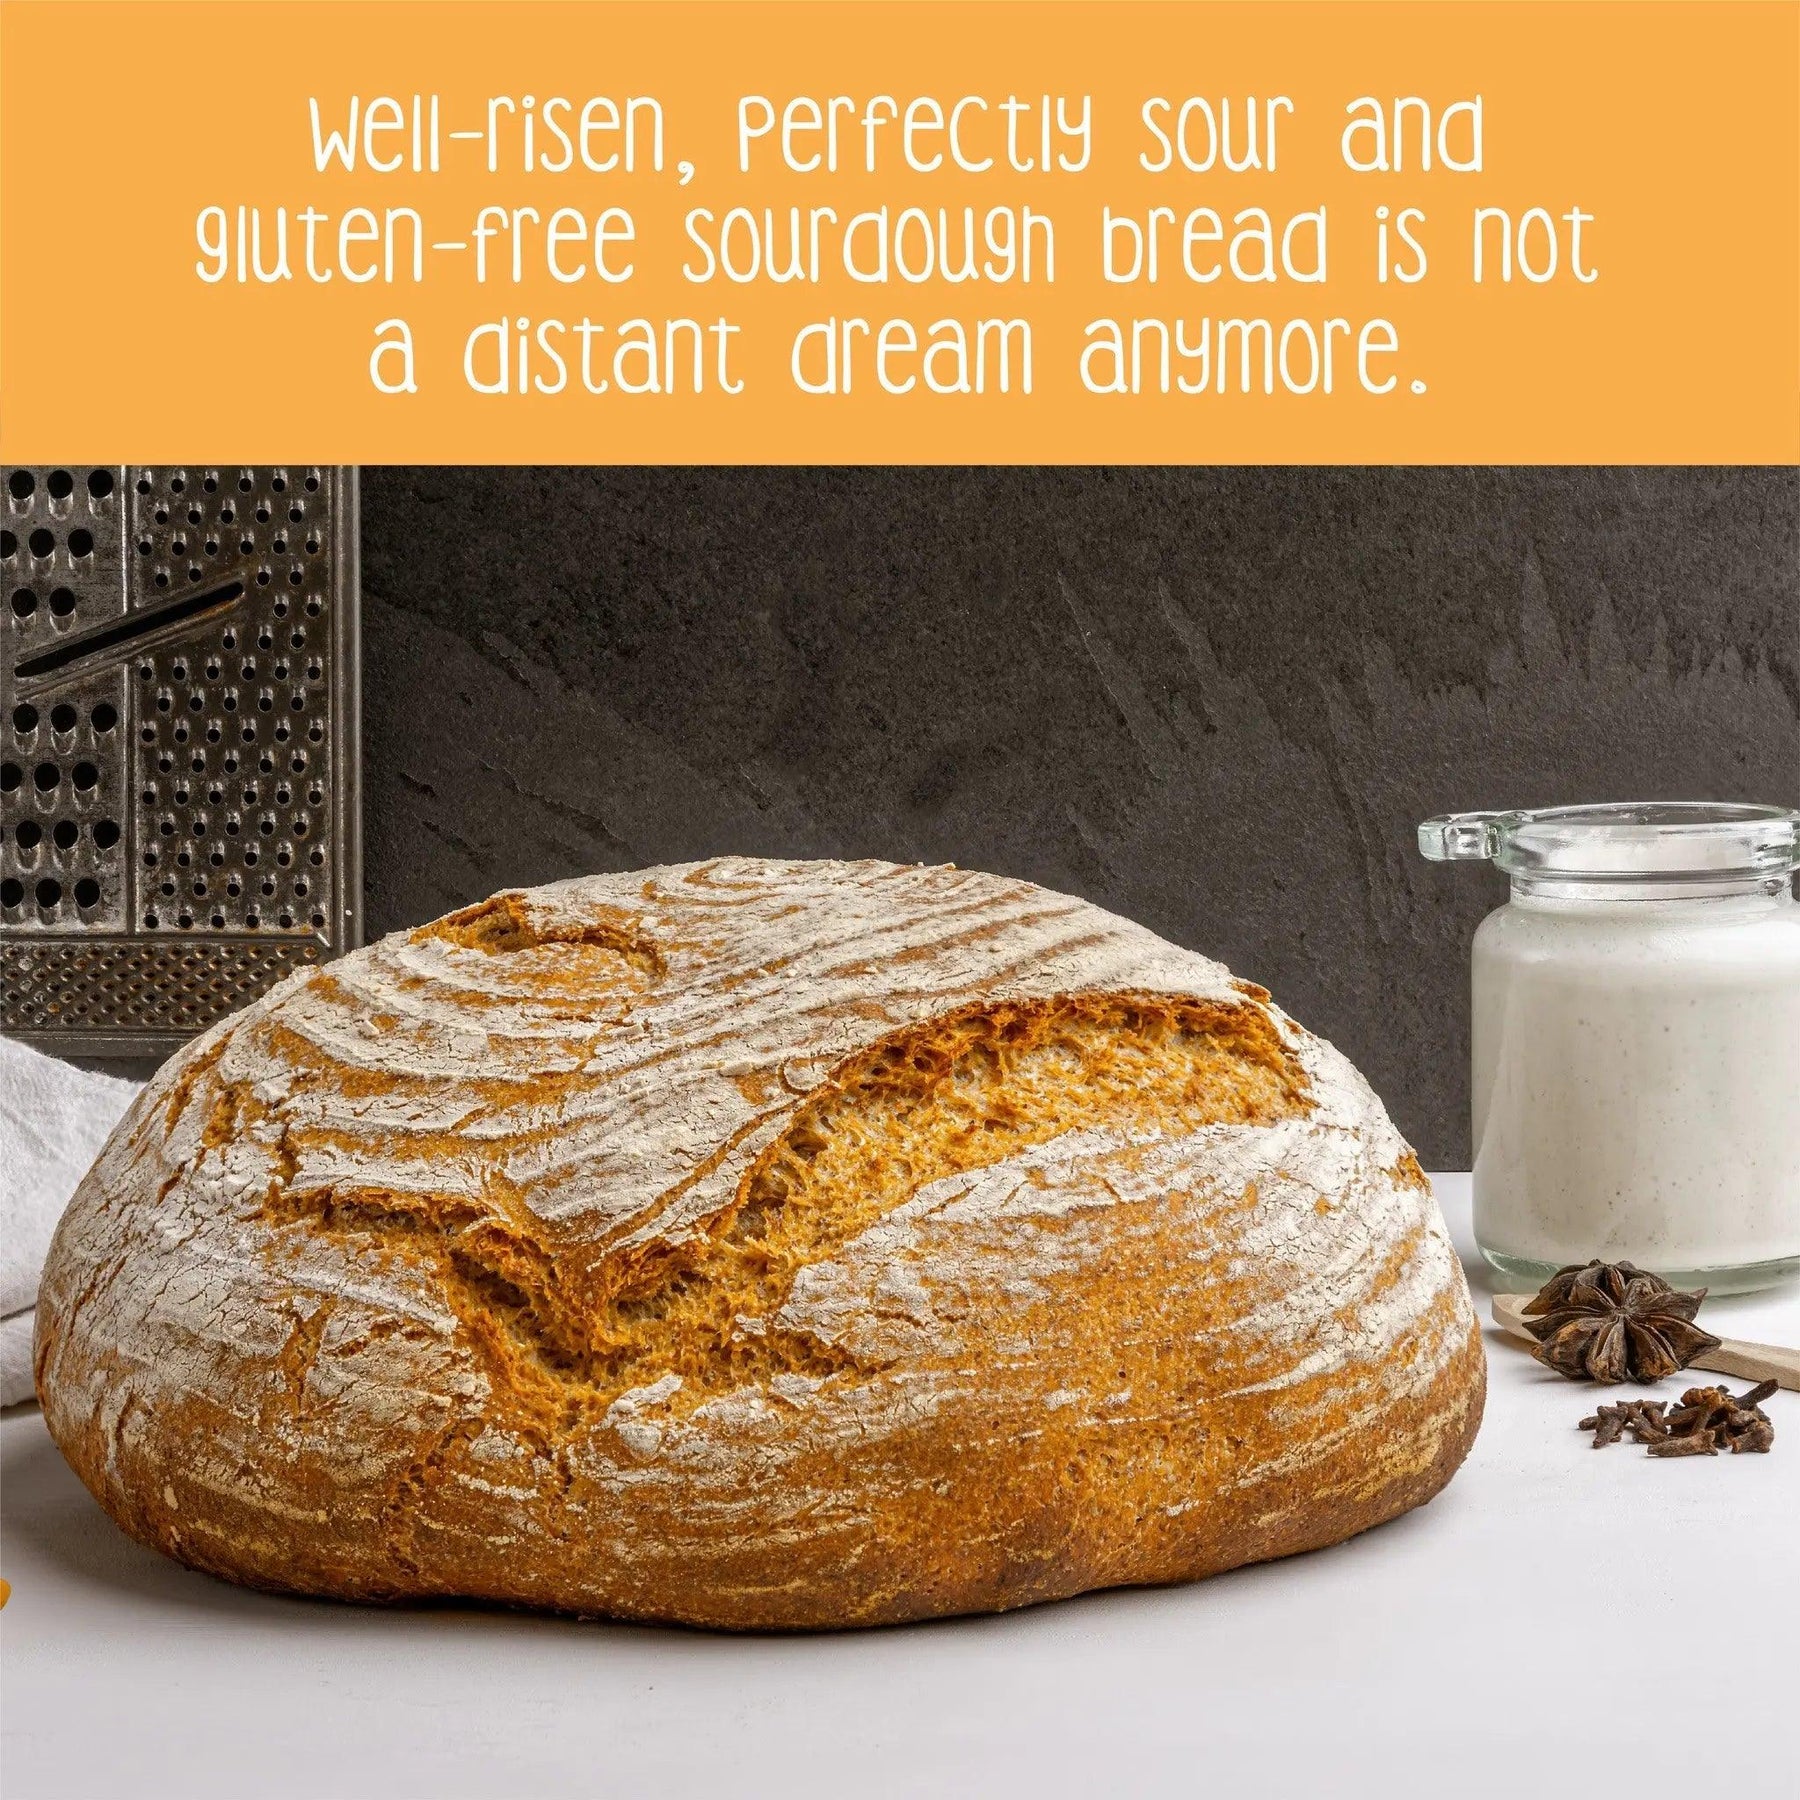 Perfectly Risen, Sour and Gluten Free Sourdough Bread by Zoh Probiotics